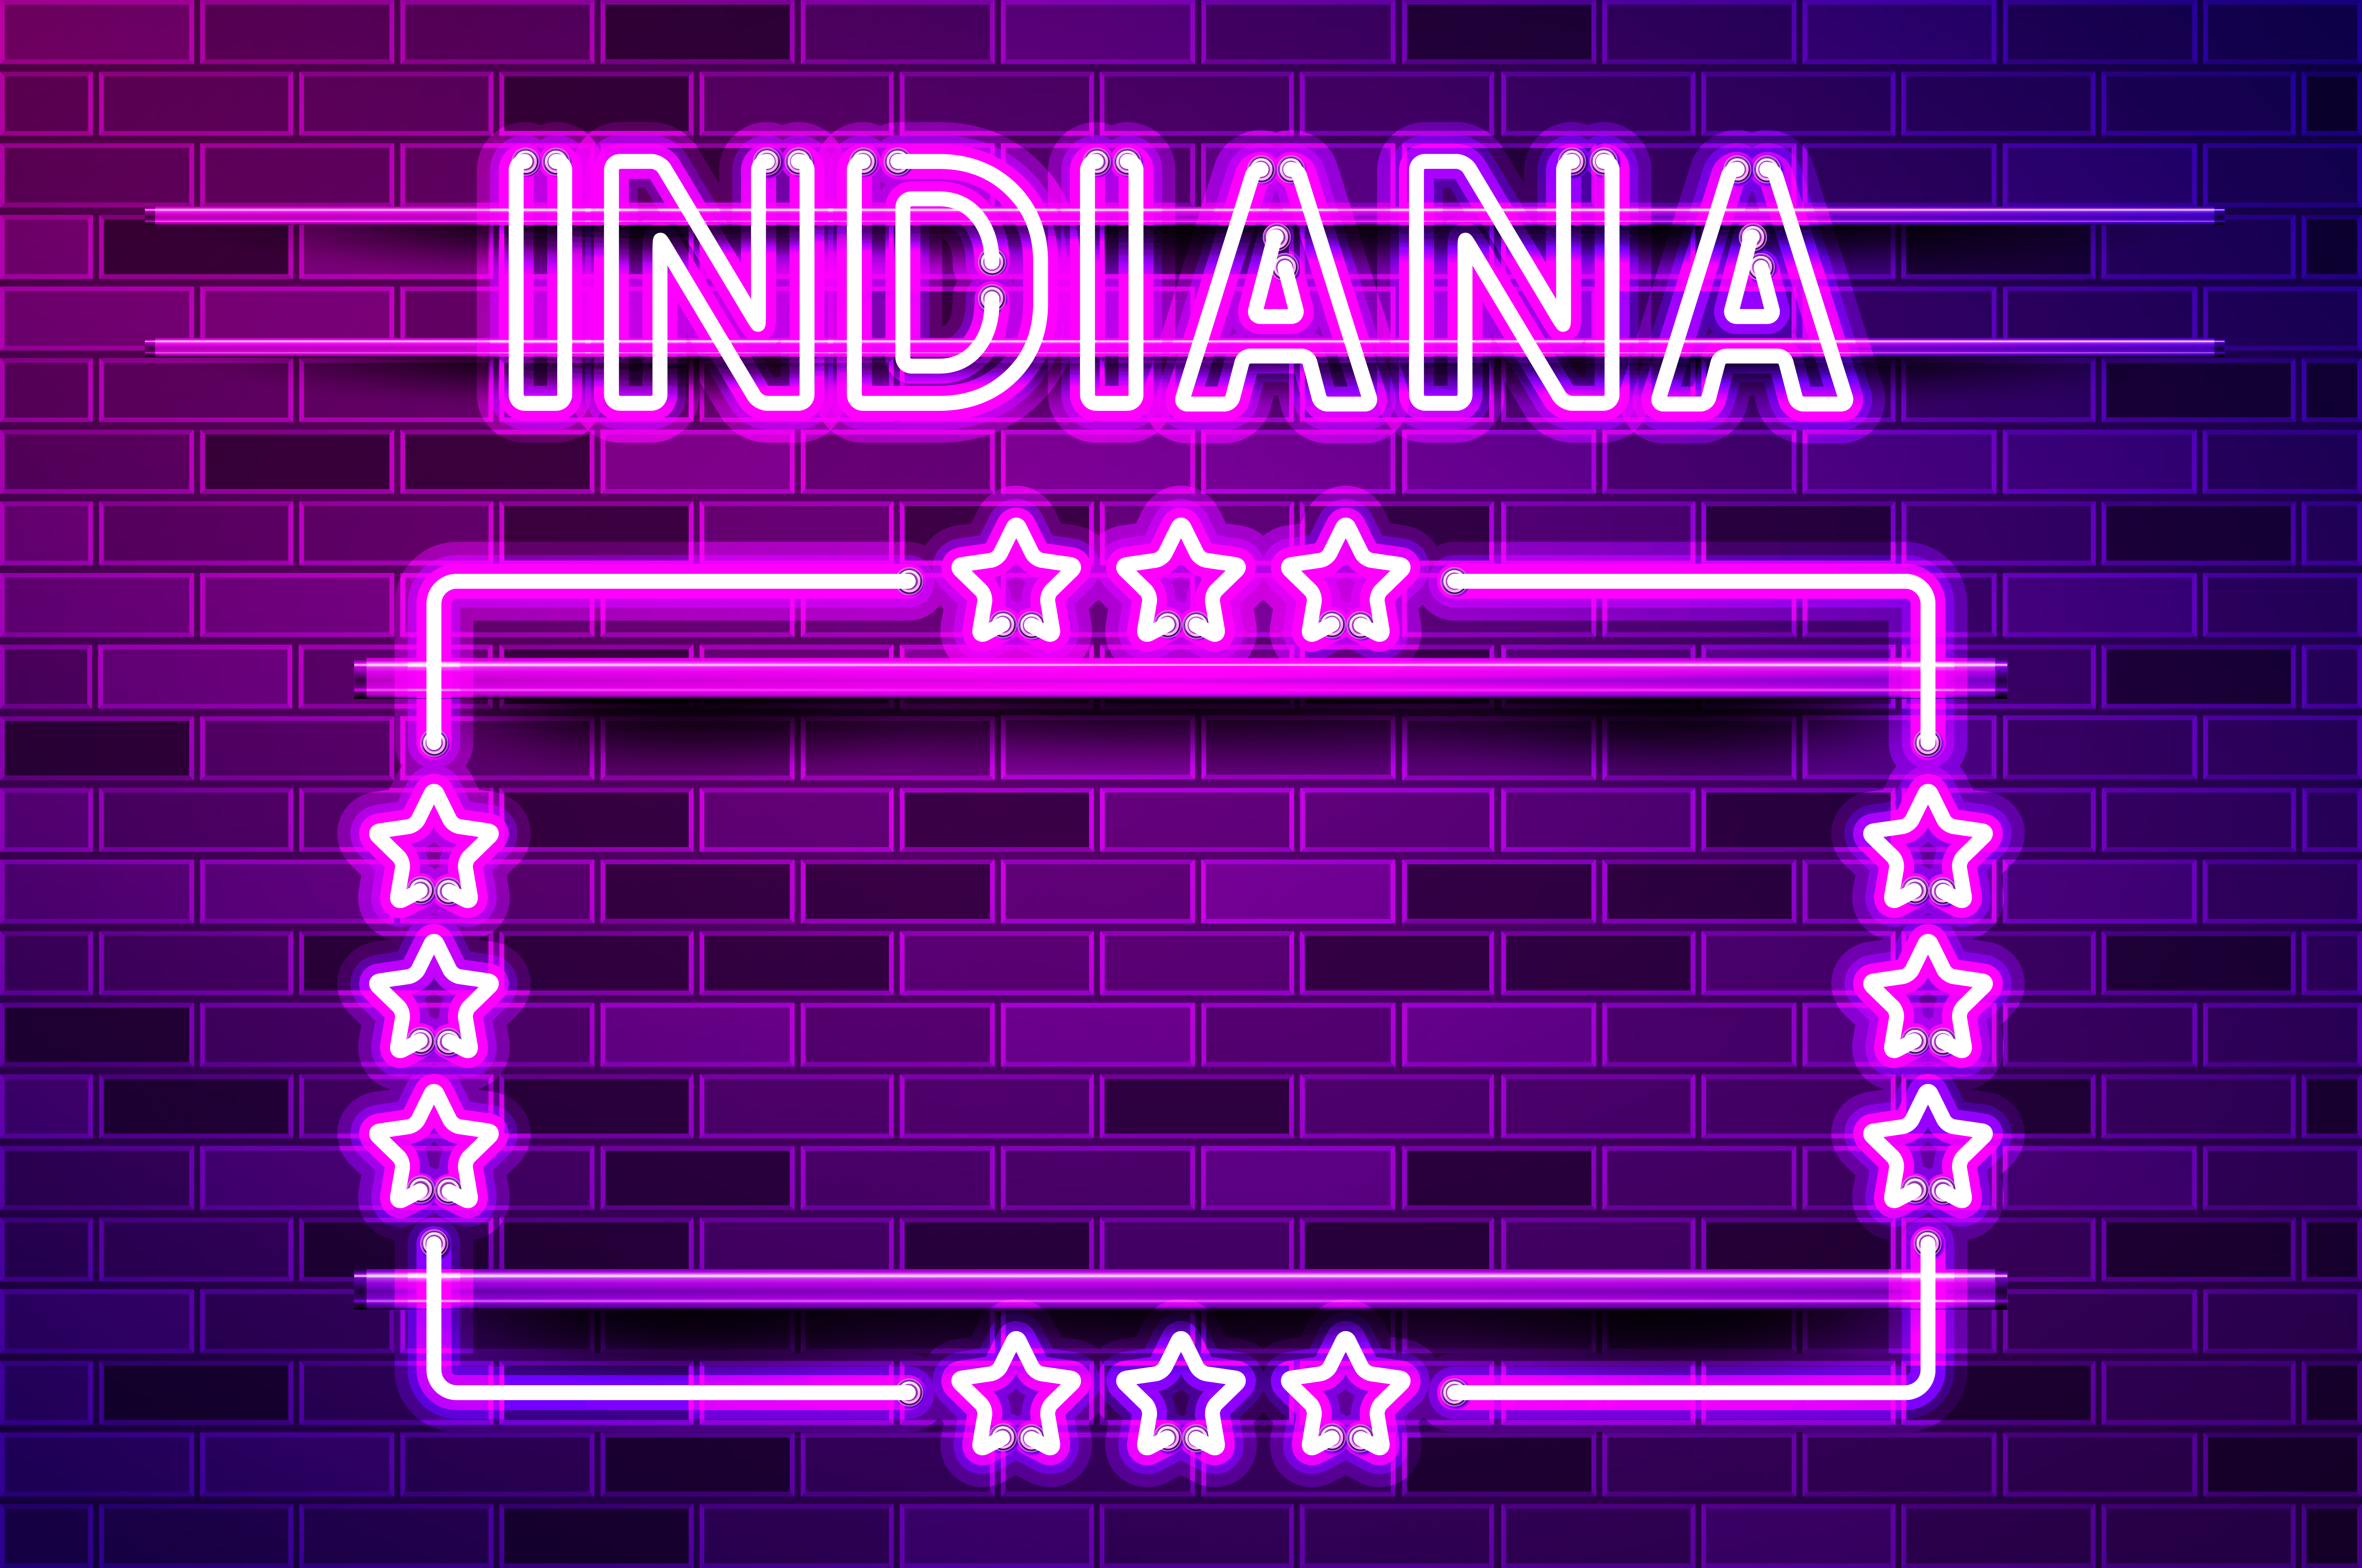 Indiana US State glowing purple neon lettering and a rectangular frame with stars. Realistic vector illustration. Purple brick wall, violet glow, metal holders.. Indiana US State glowing purple neon lettering and a rectangular frame with stars